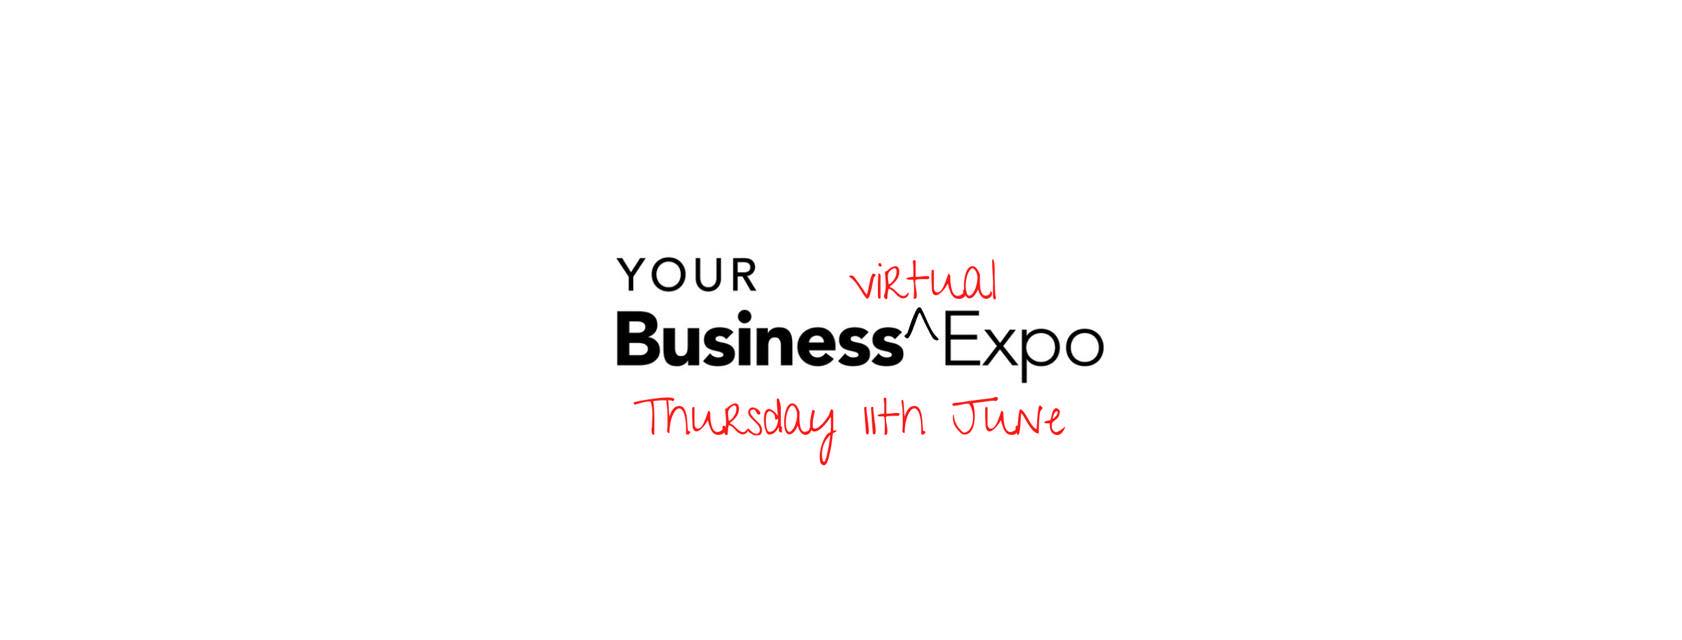 Your Business Virtual Expo